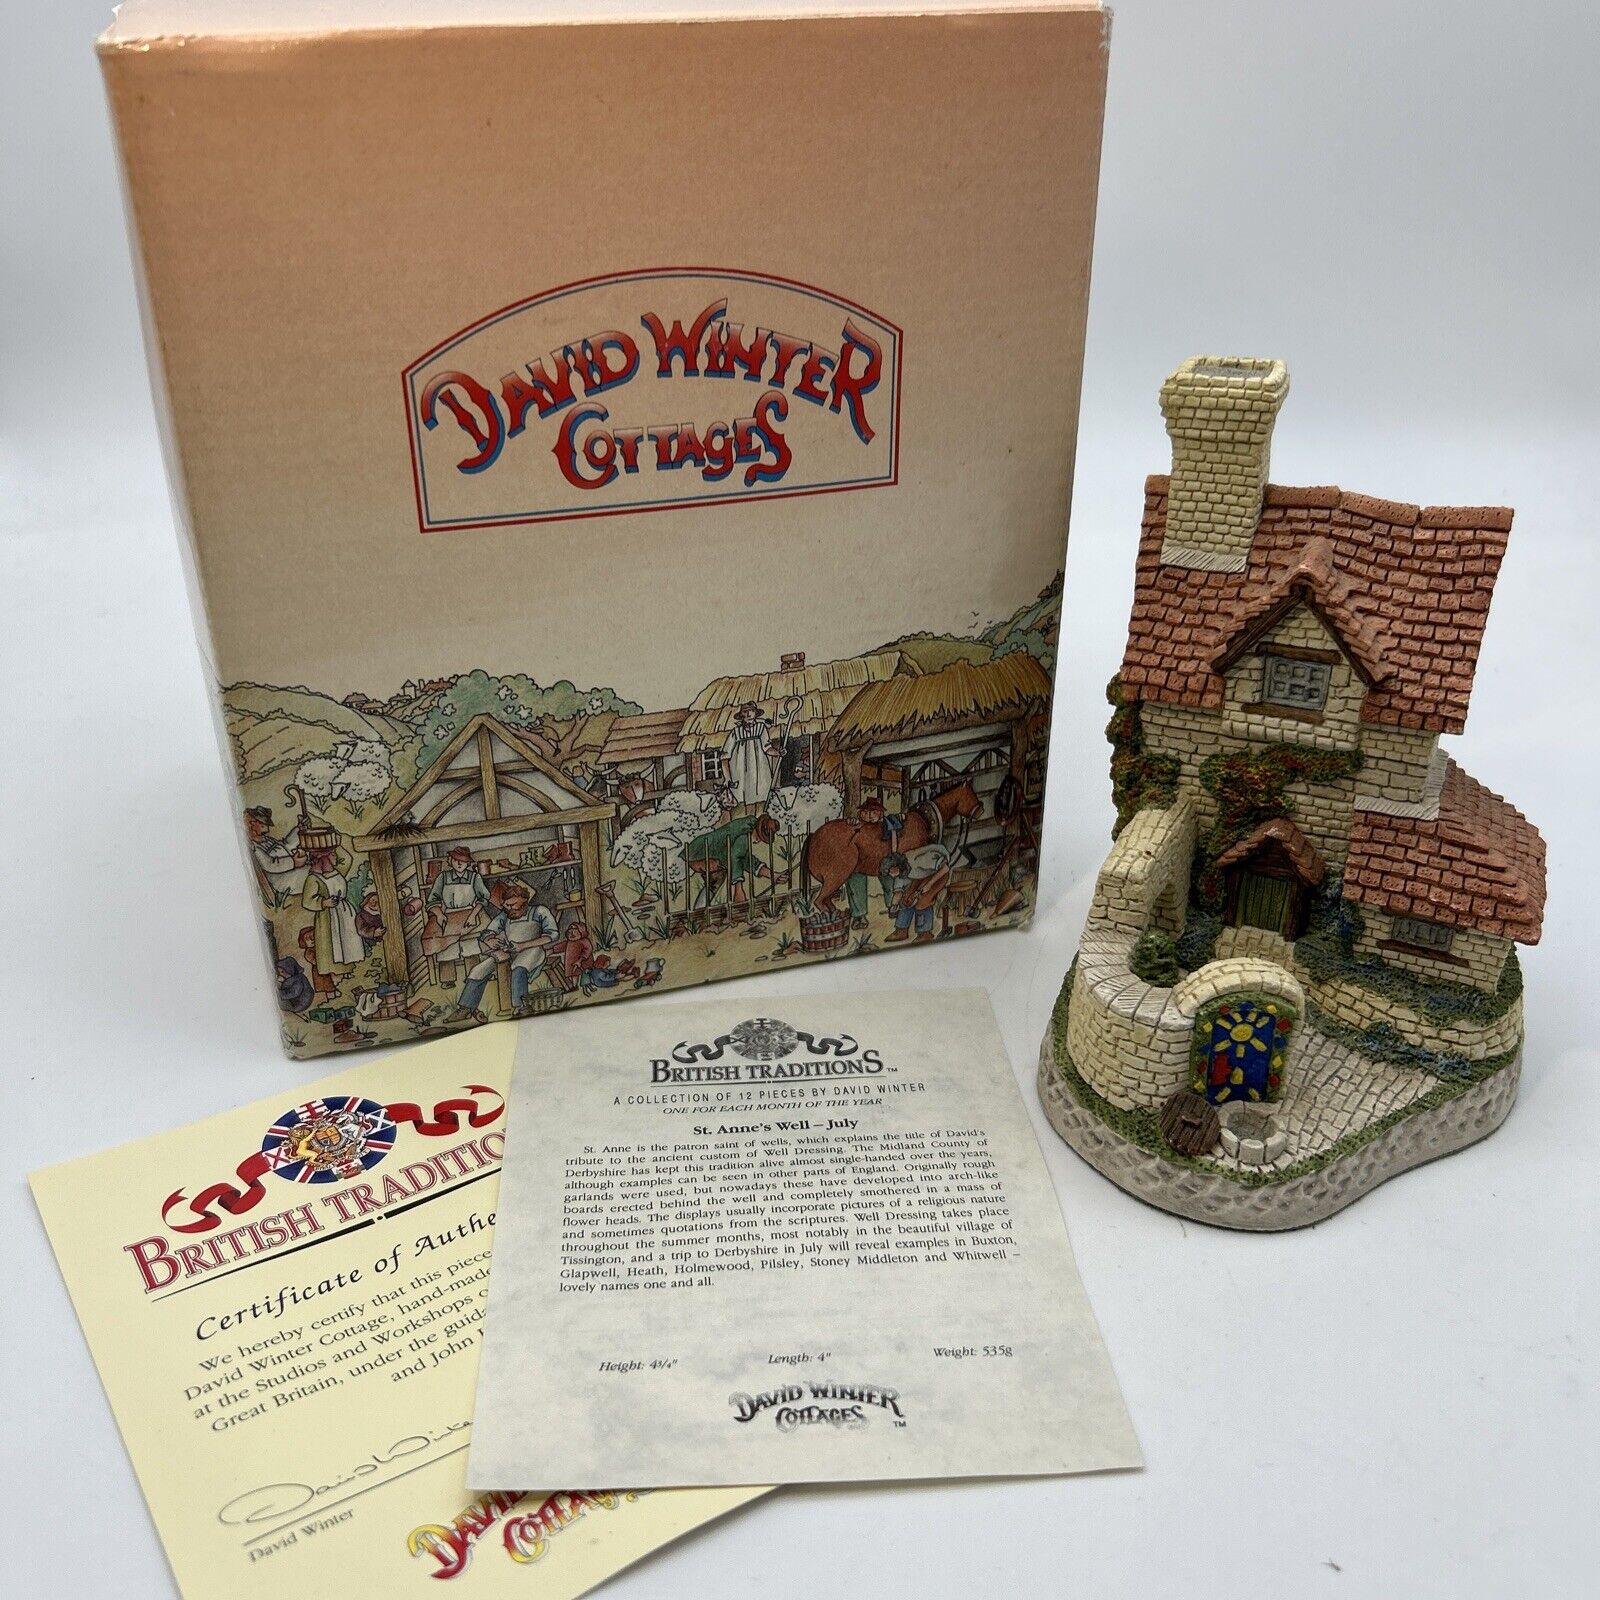 Vtg David Winter Cottages St. Anne’s Well July British Traditions w/Box & COA